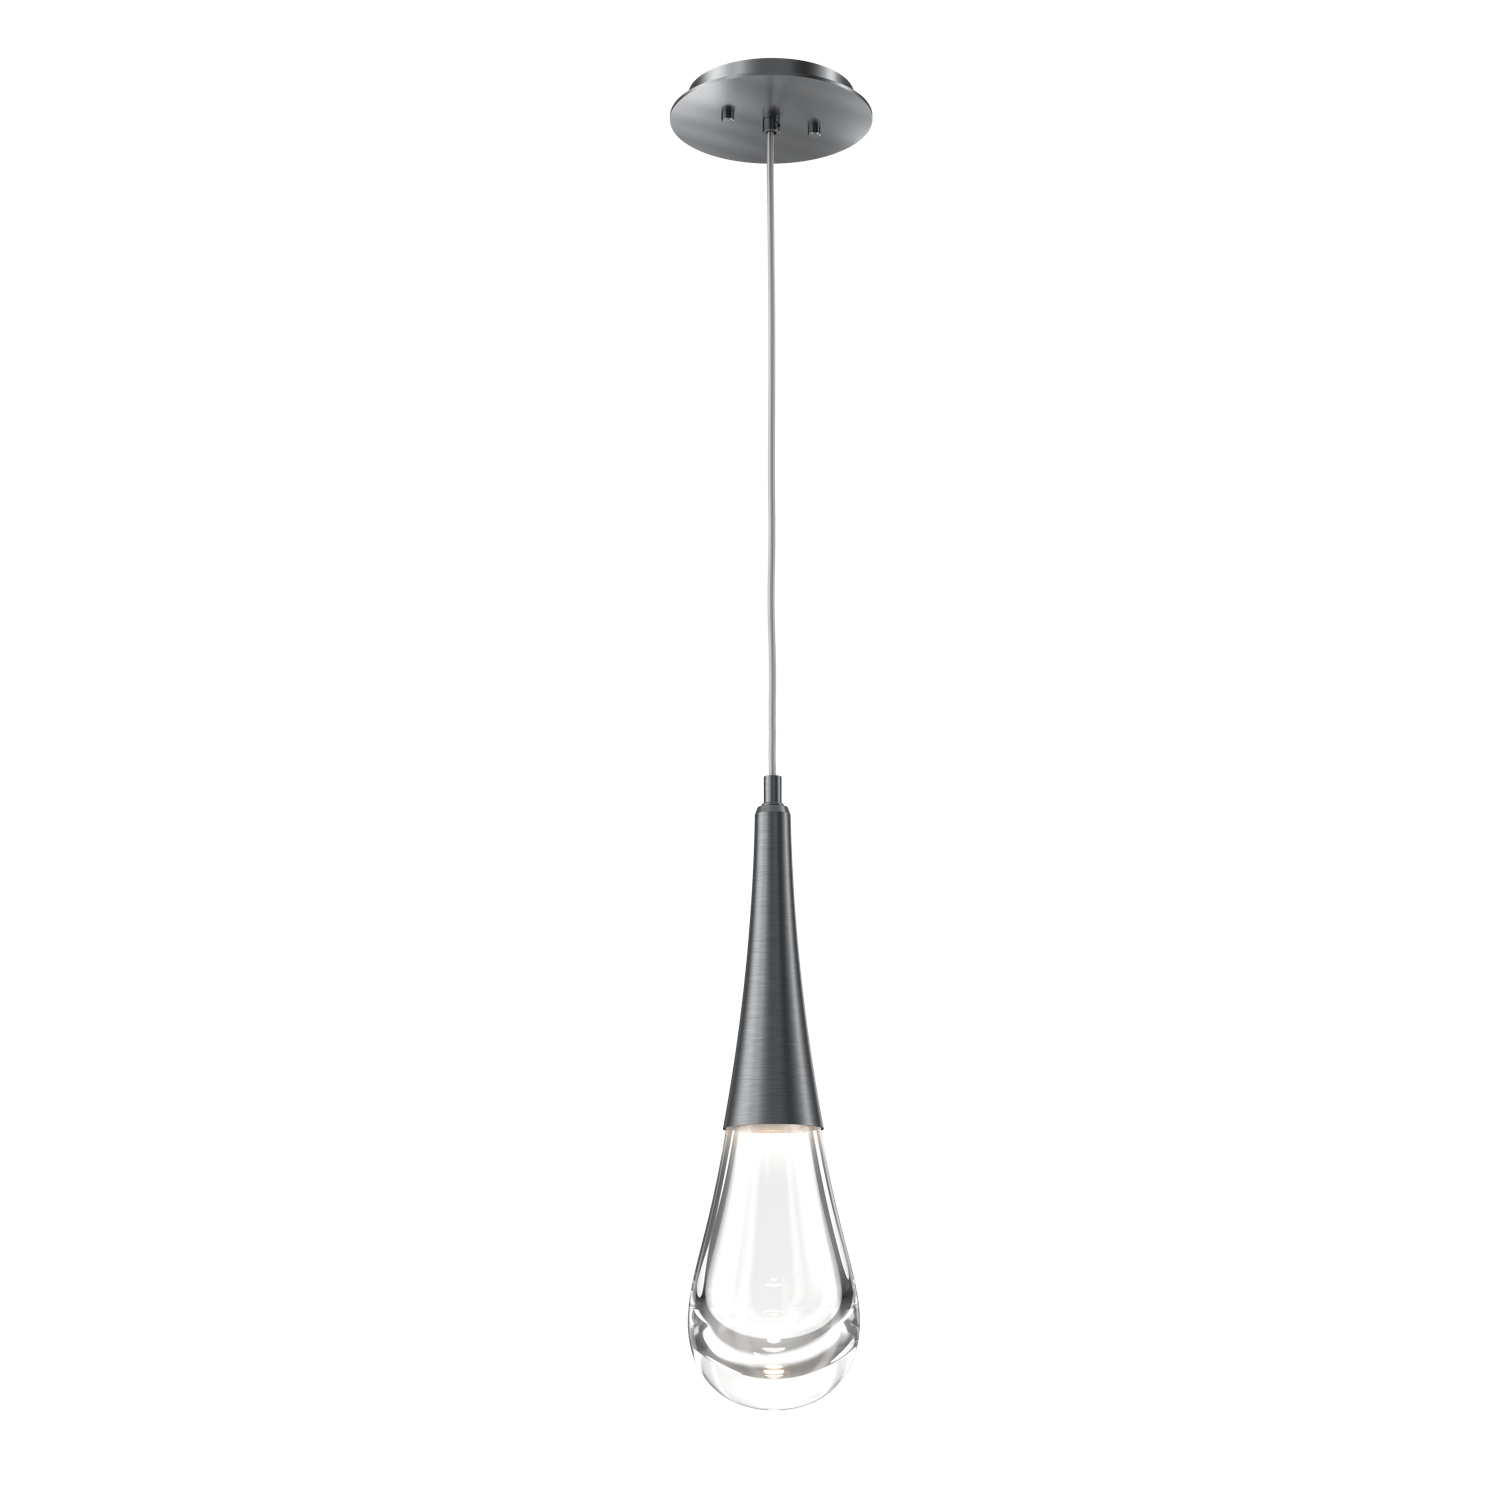 LAB0078-01-GM-Hammerton-Studio-Raindrop-pendant-light-with-gunmetal-finish-and-clear-blown-glass-shades-and-LED-lamping